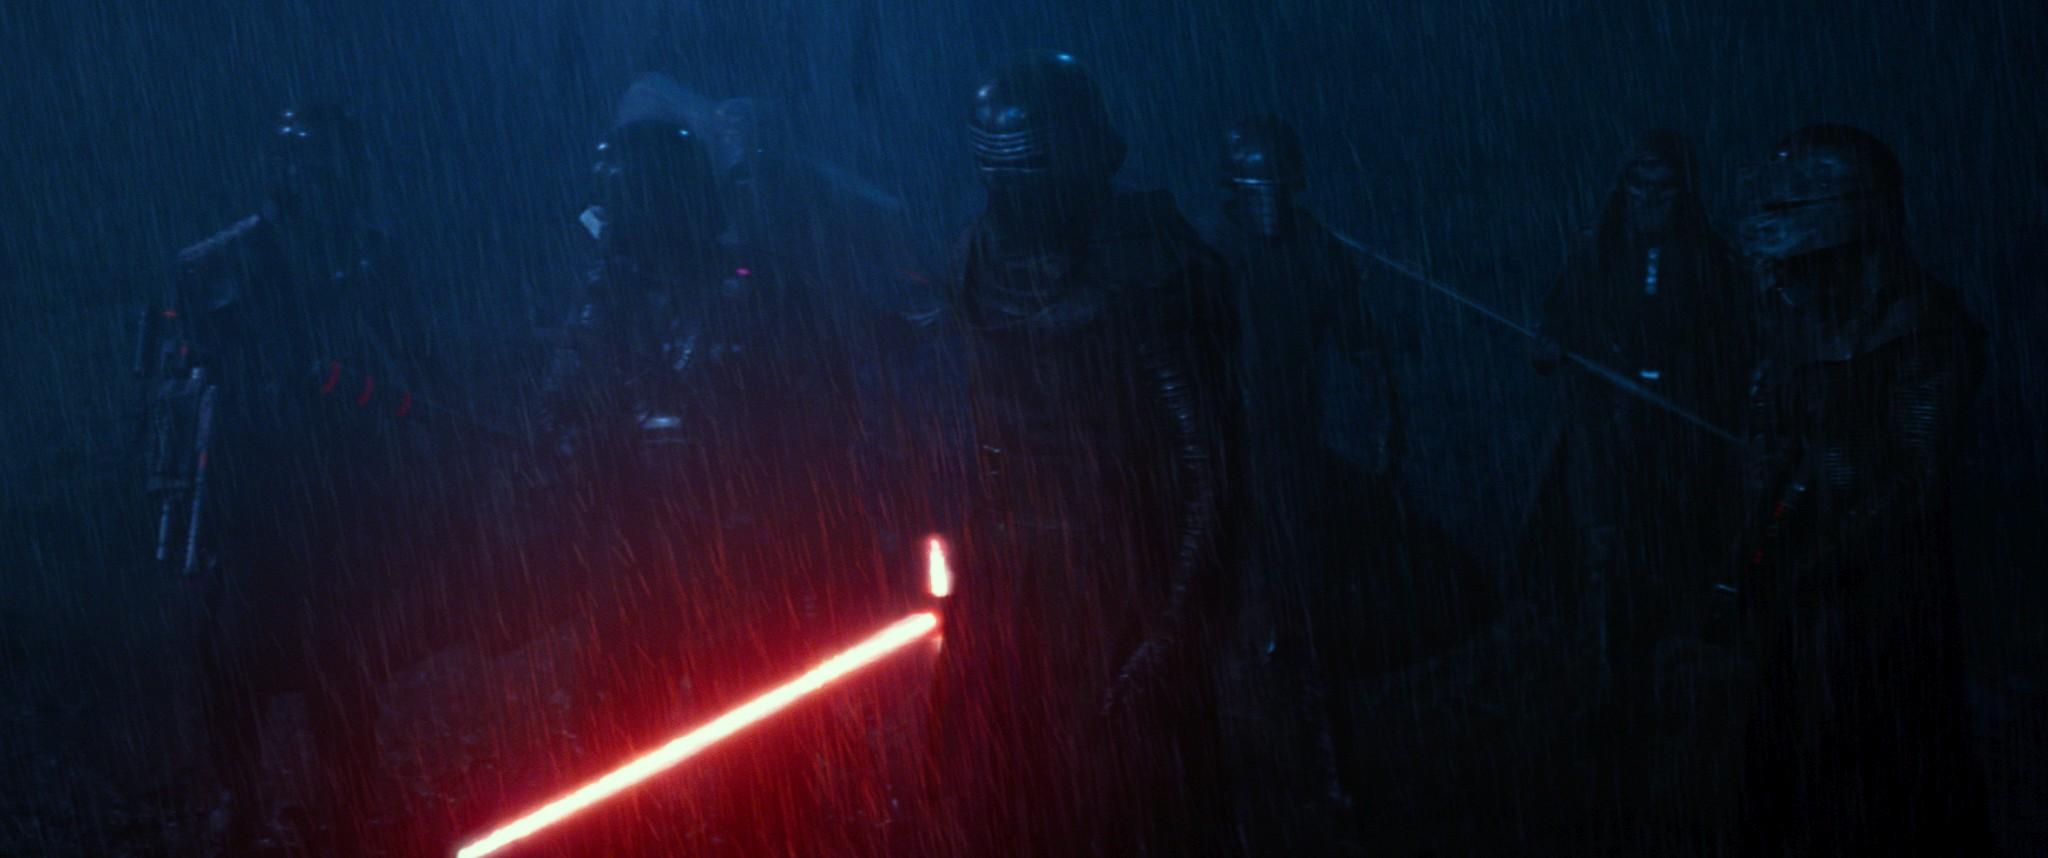 Star Wars Episode VII: The Force Awakens Wallpapers and Backgrounds